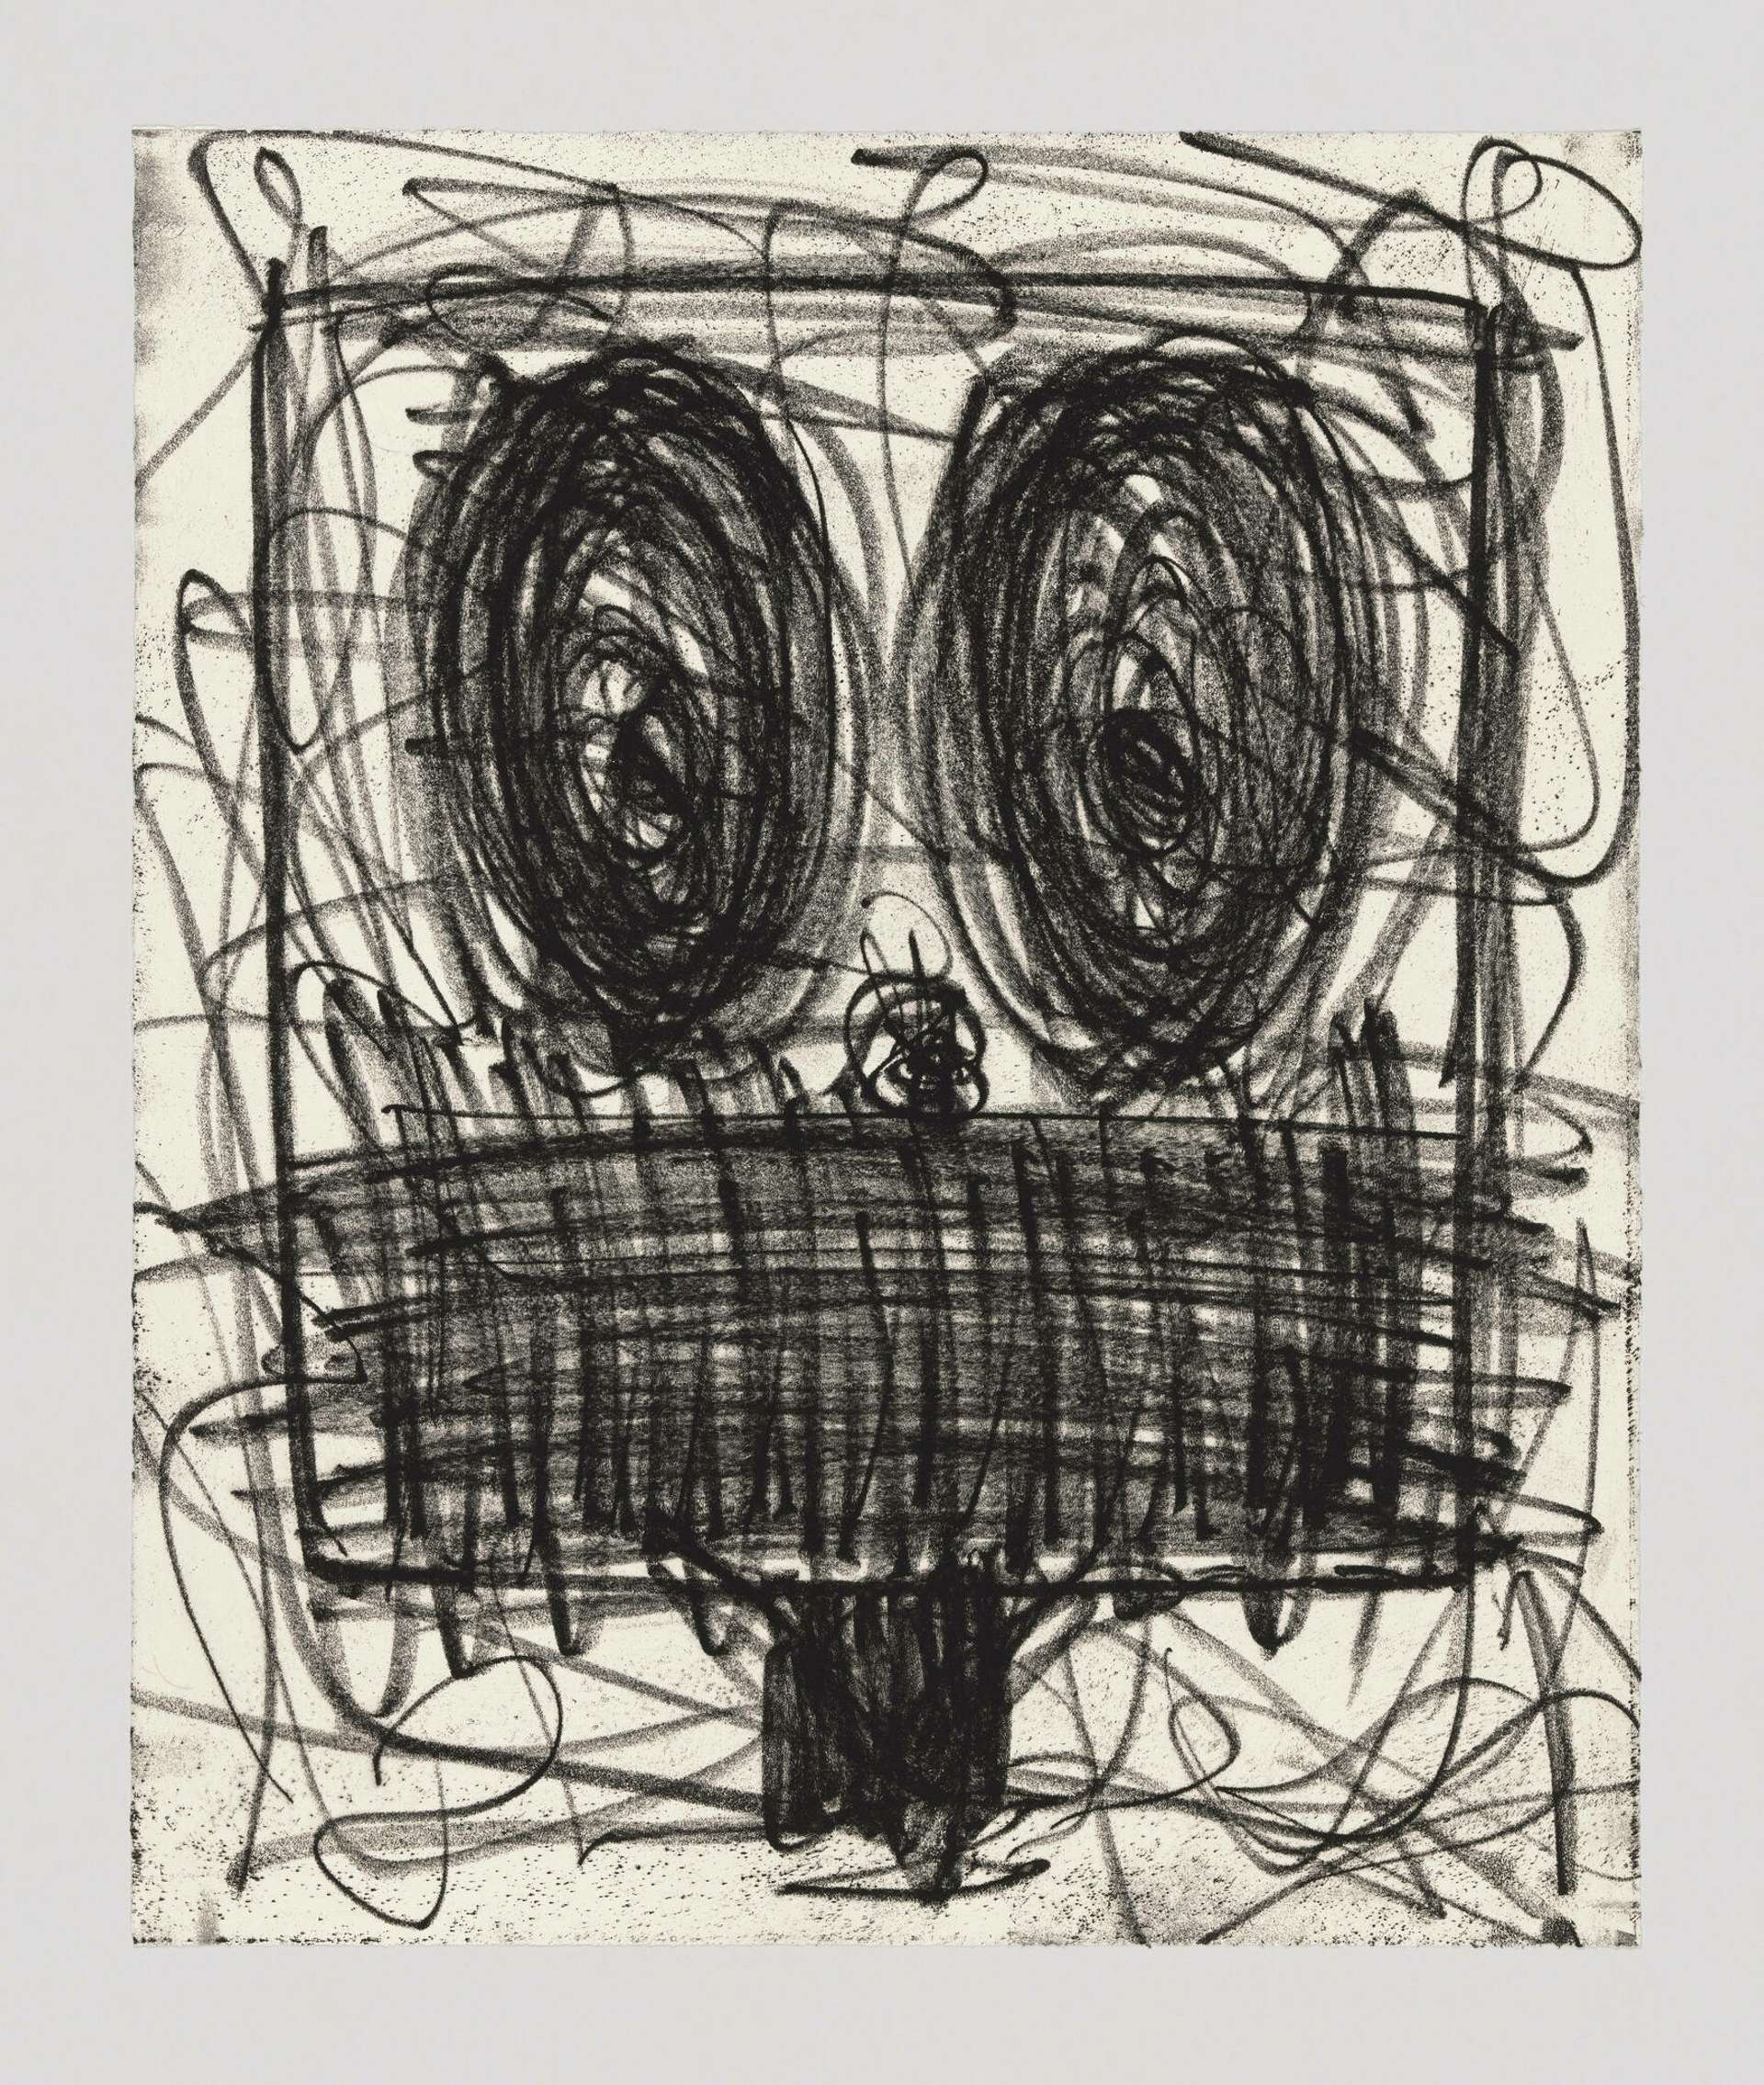 Untitled (Anxious Man) by Rashid Johnson. The image is of a humanoid, square face created in frantic black crayon scriblles on a cream background. 